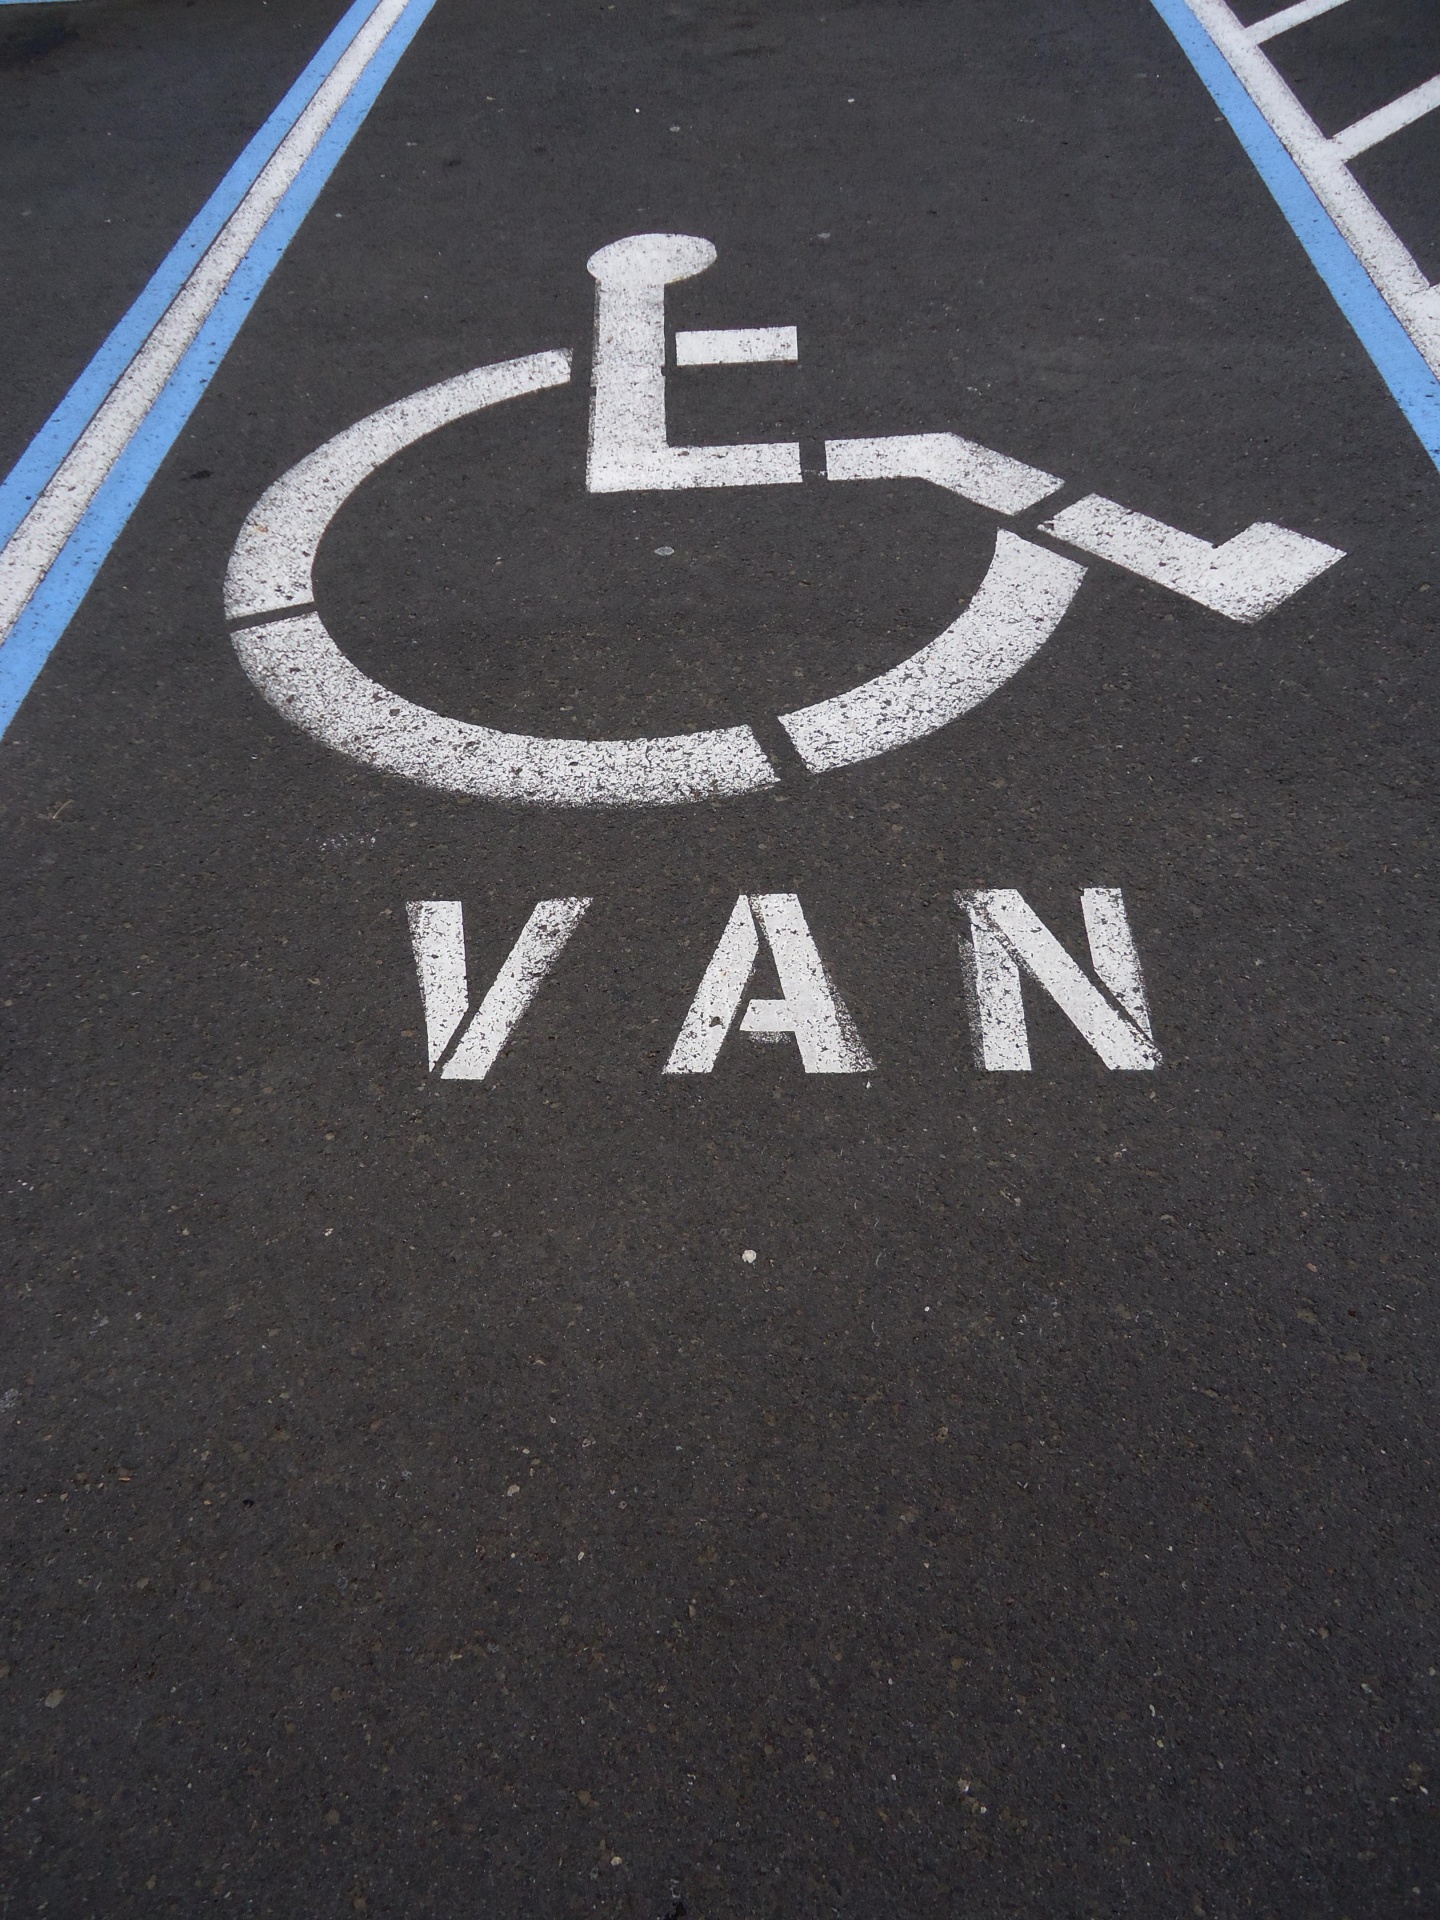 Handicapped Parking Space For A Van